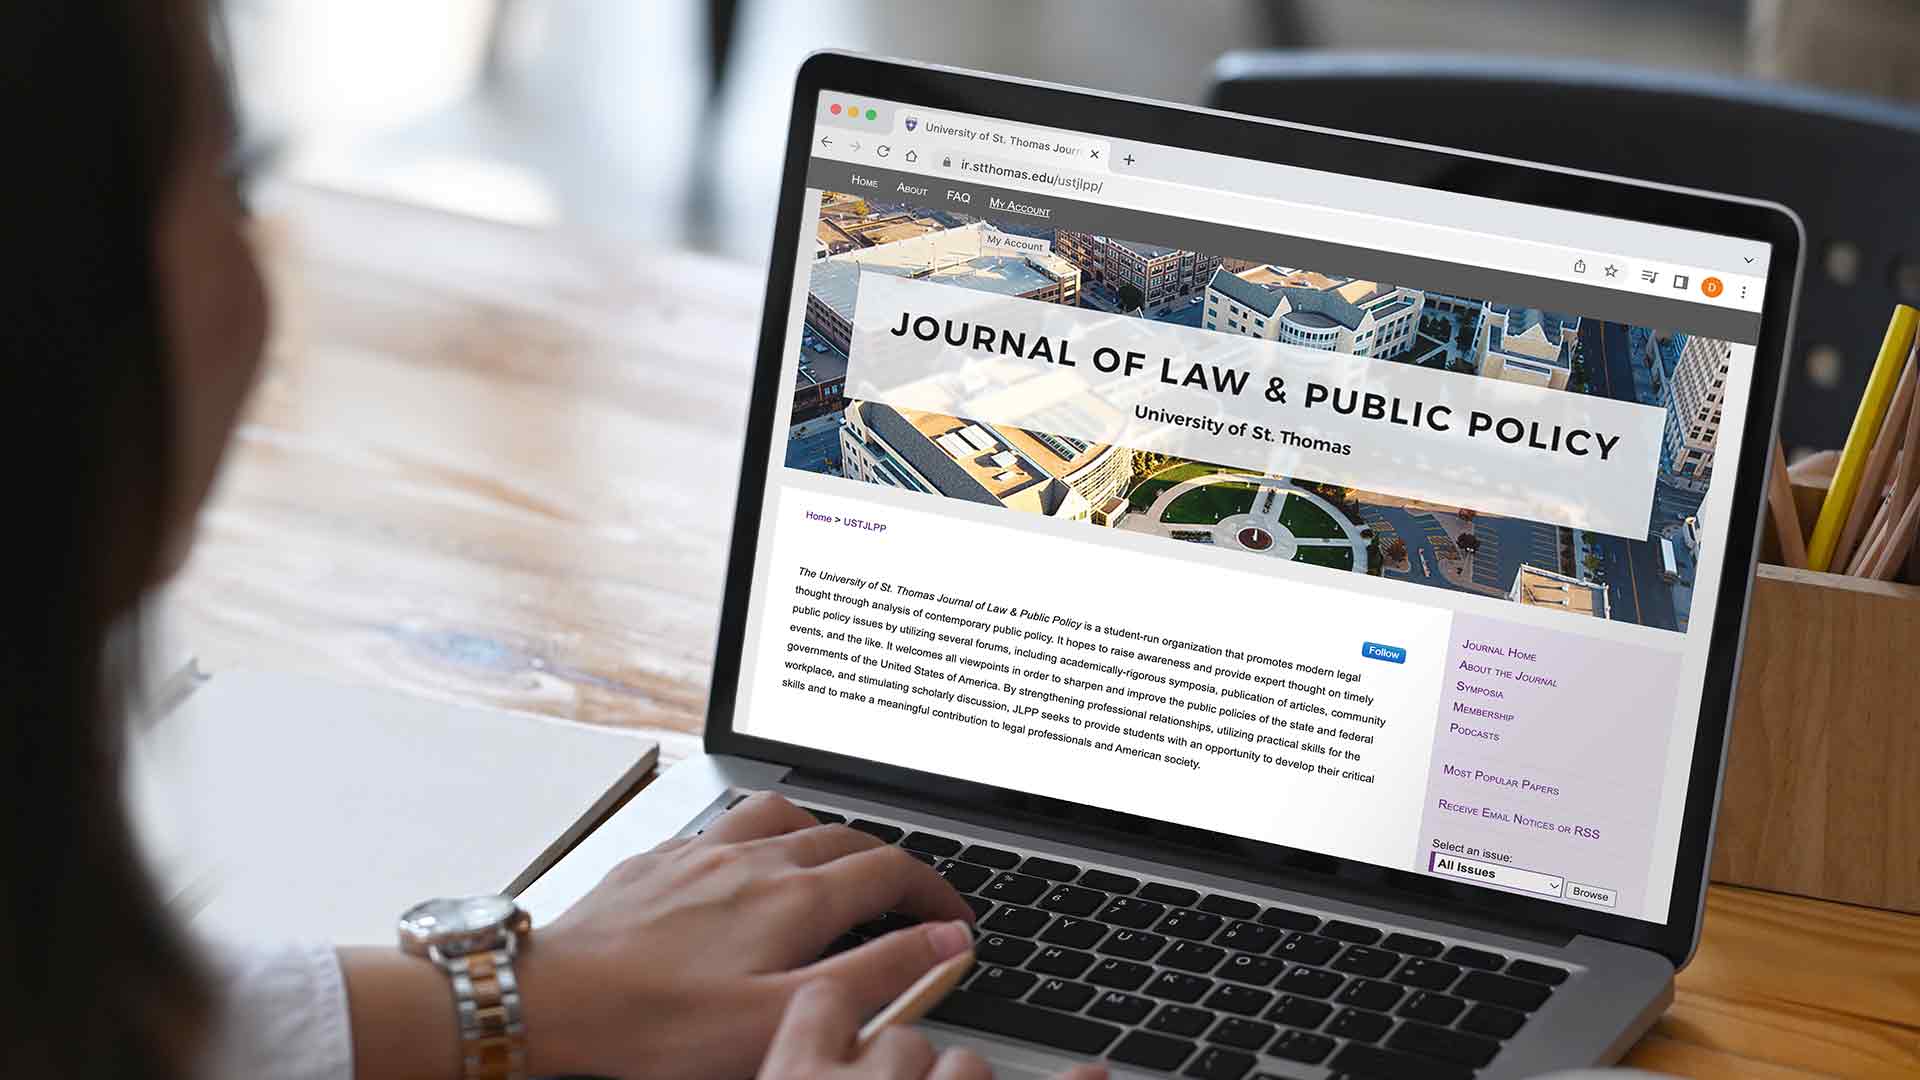 Journal of law on a laptop